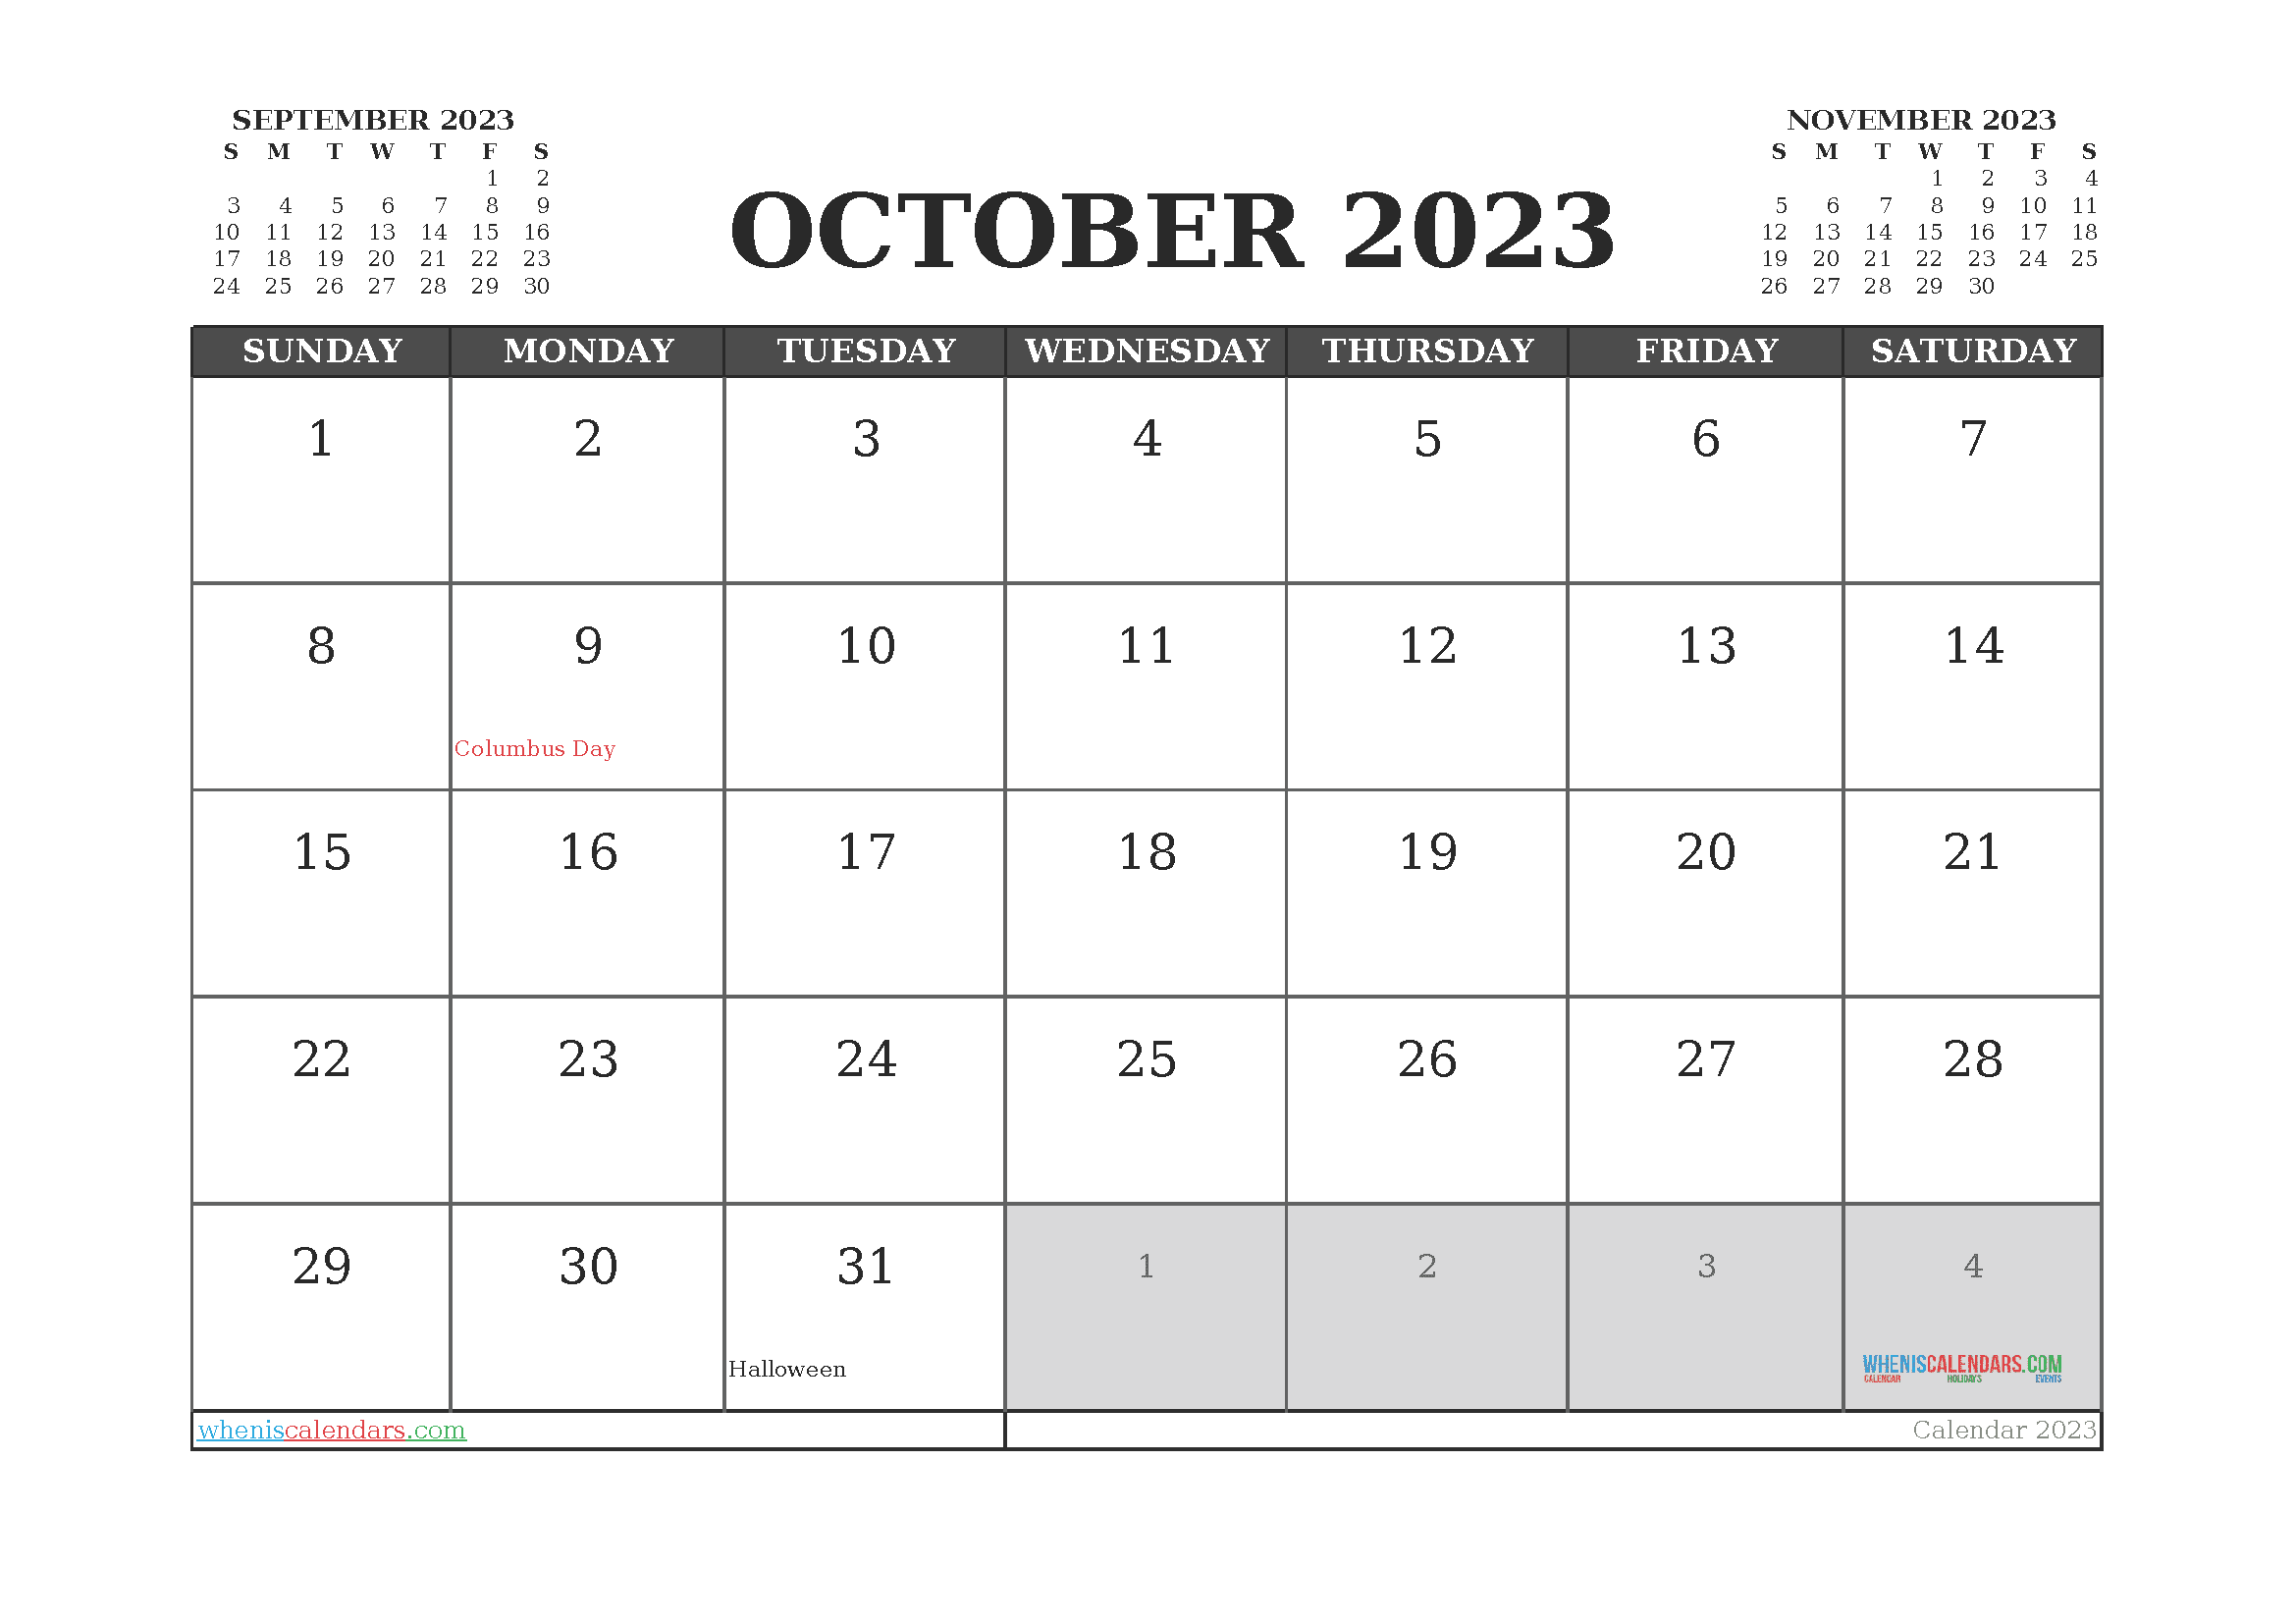 Free Printable Calendar October 2023 with Holidays PDF in Landscape